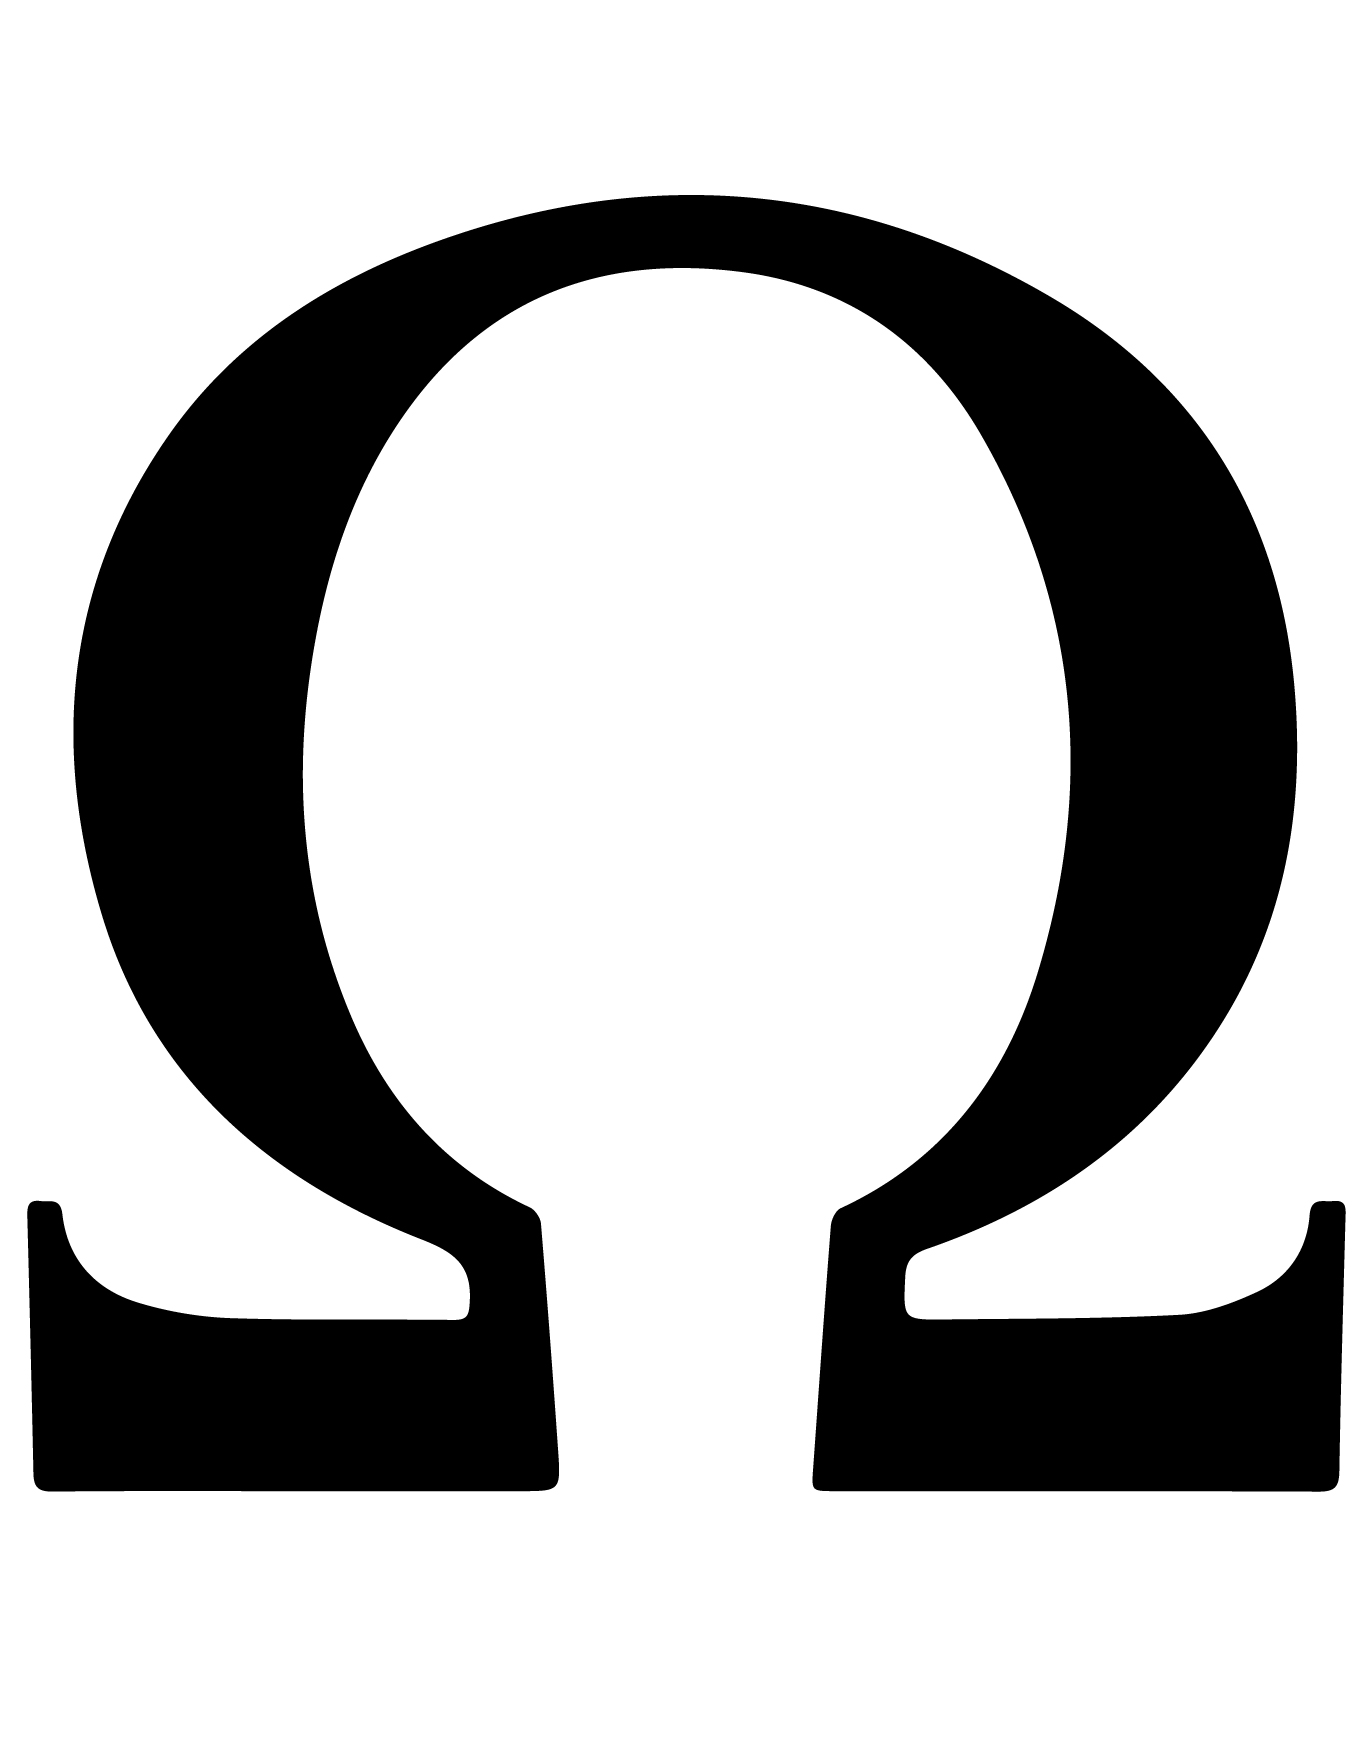 Omega-Symbol-and-Its-Meaning.jpg